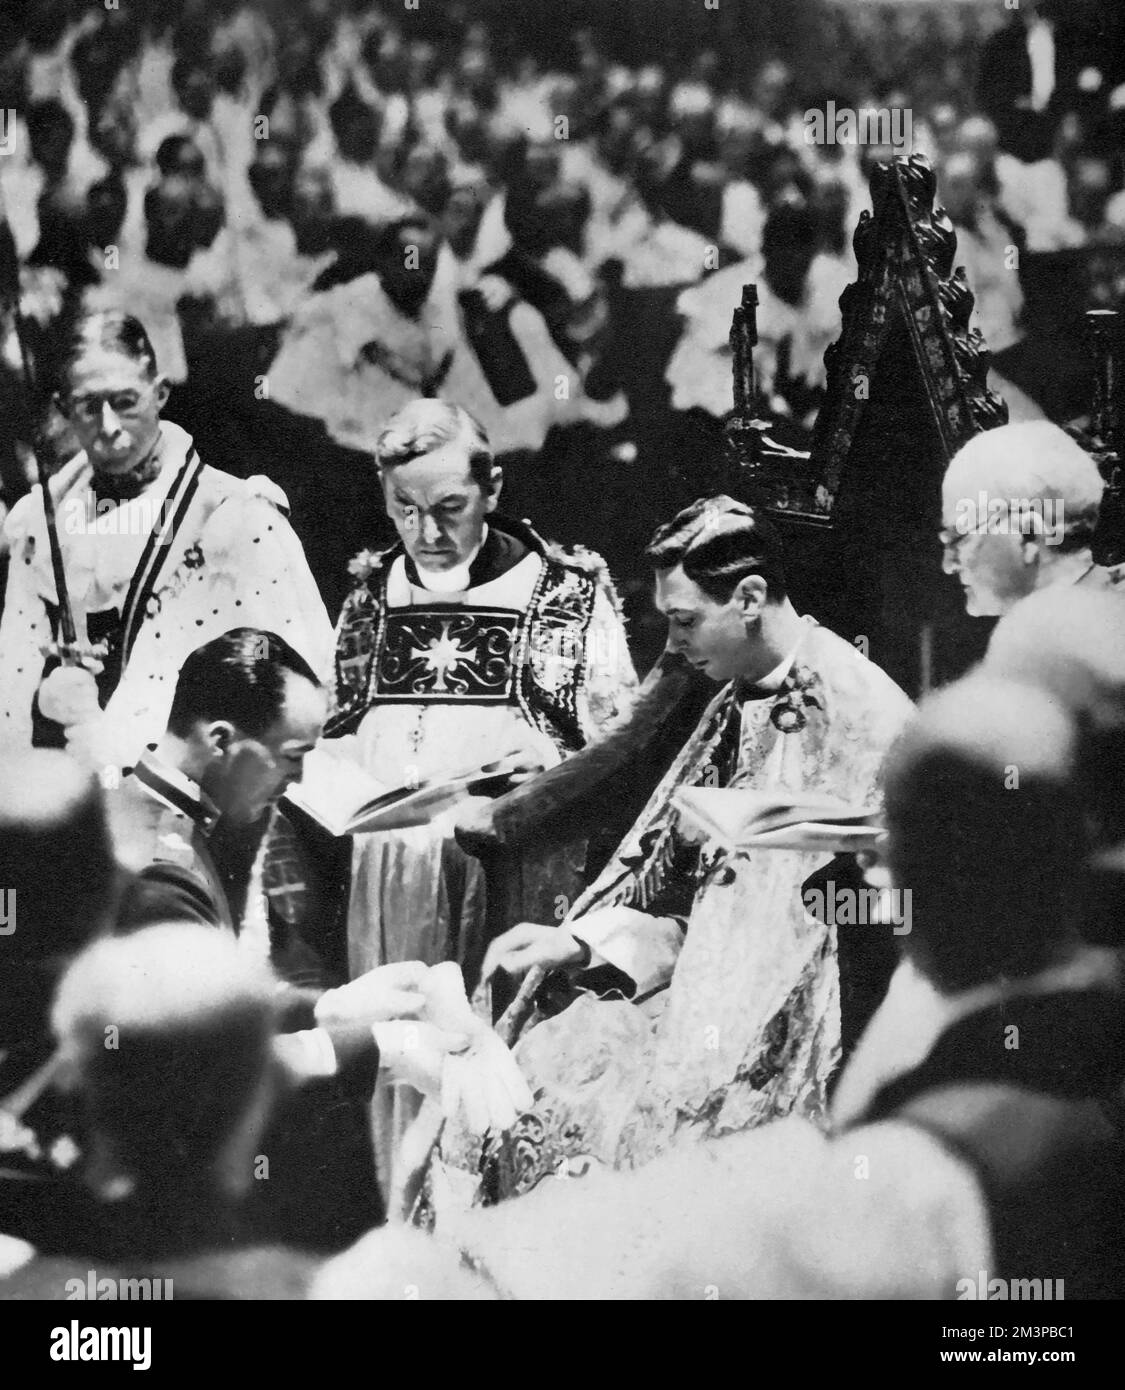 The Earl of Lincoln, as Deputy of the Lord of the Manor of Worksop, handing over a glove, for King George VI (1895-1952) to wear during his coronation, 1937. George VI's coronation took place on 12th May 1937 at Westminster Abbey, the date previously intended for his brother Edward VIII's coronation. Stock Photo